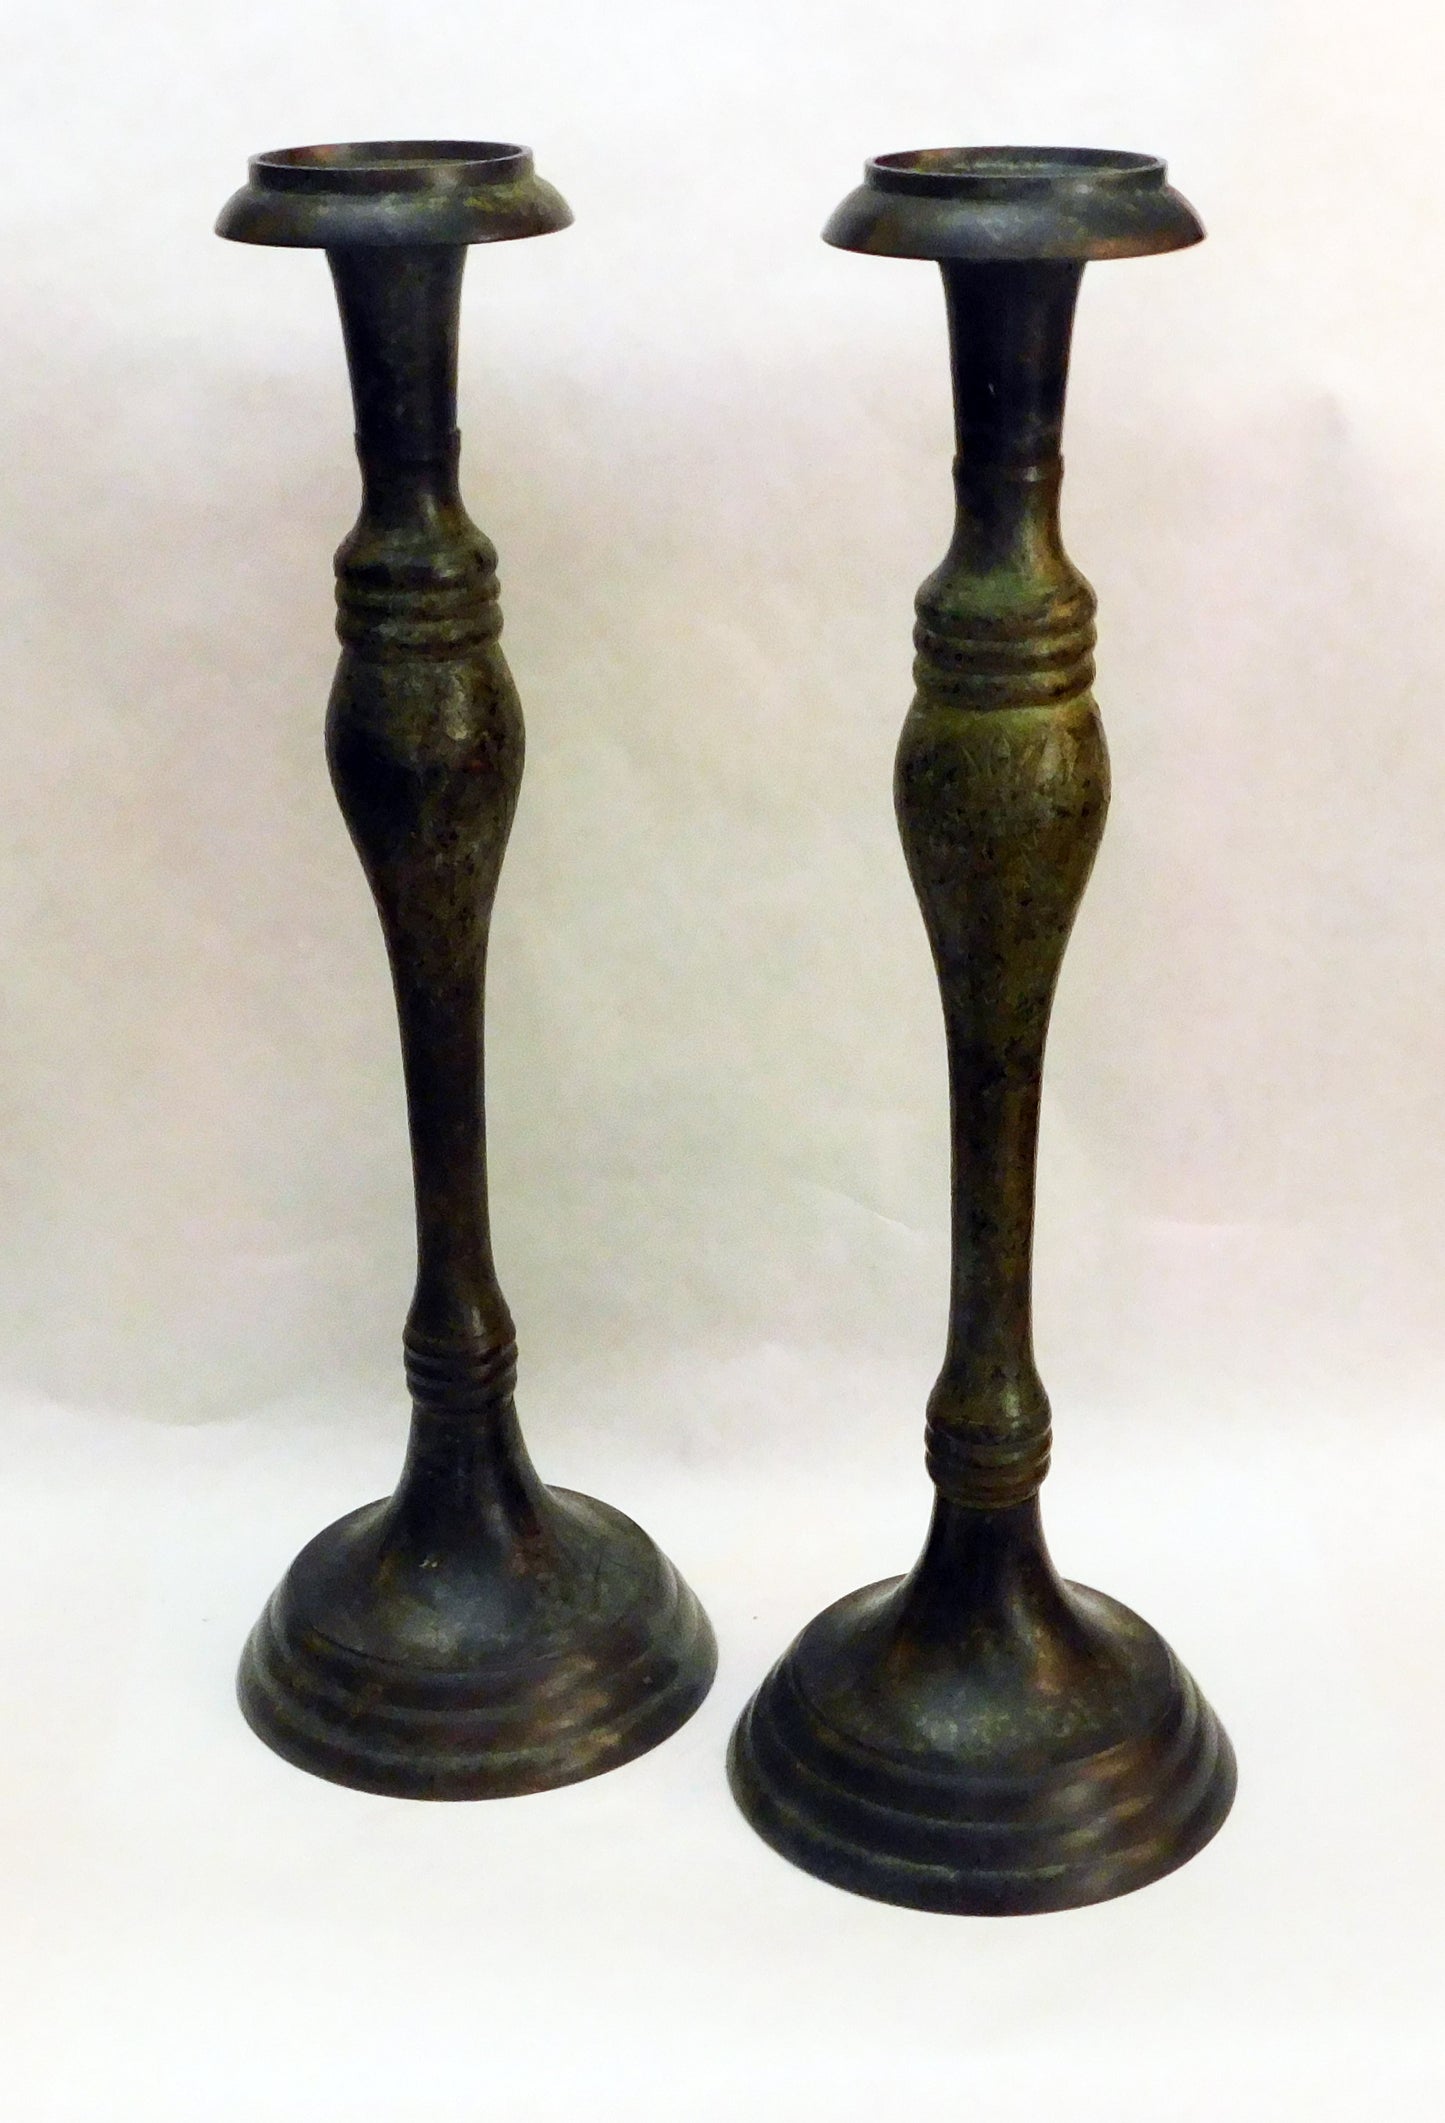 Mixed Metal Candlesticks Made in India